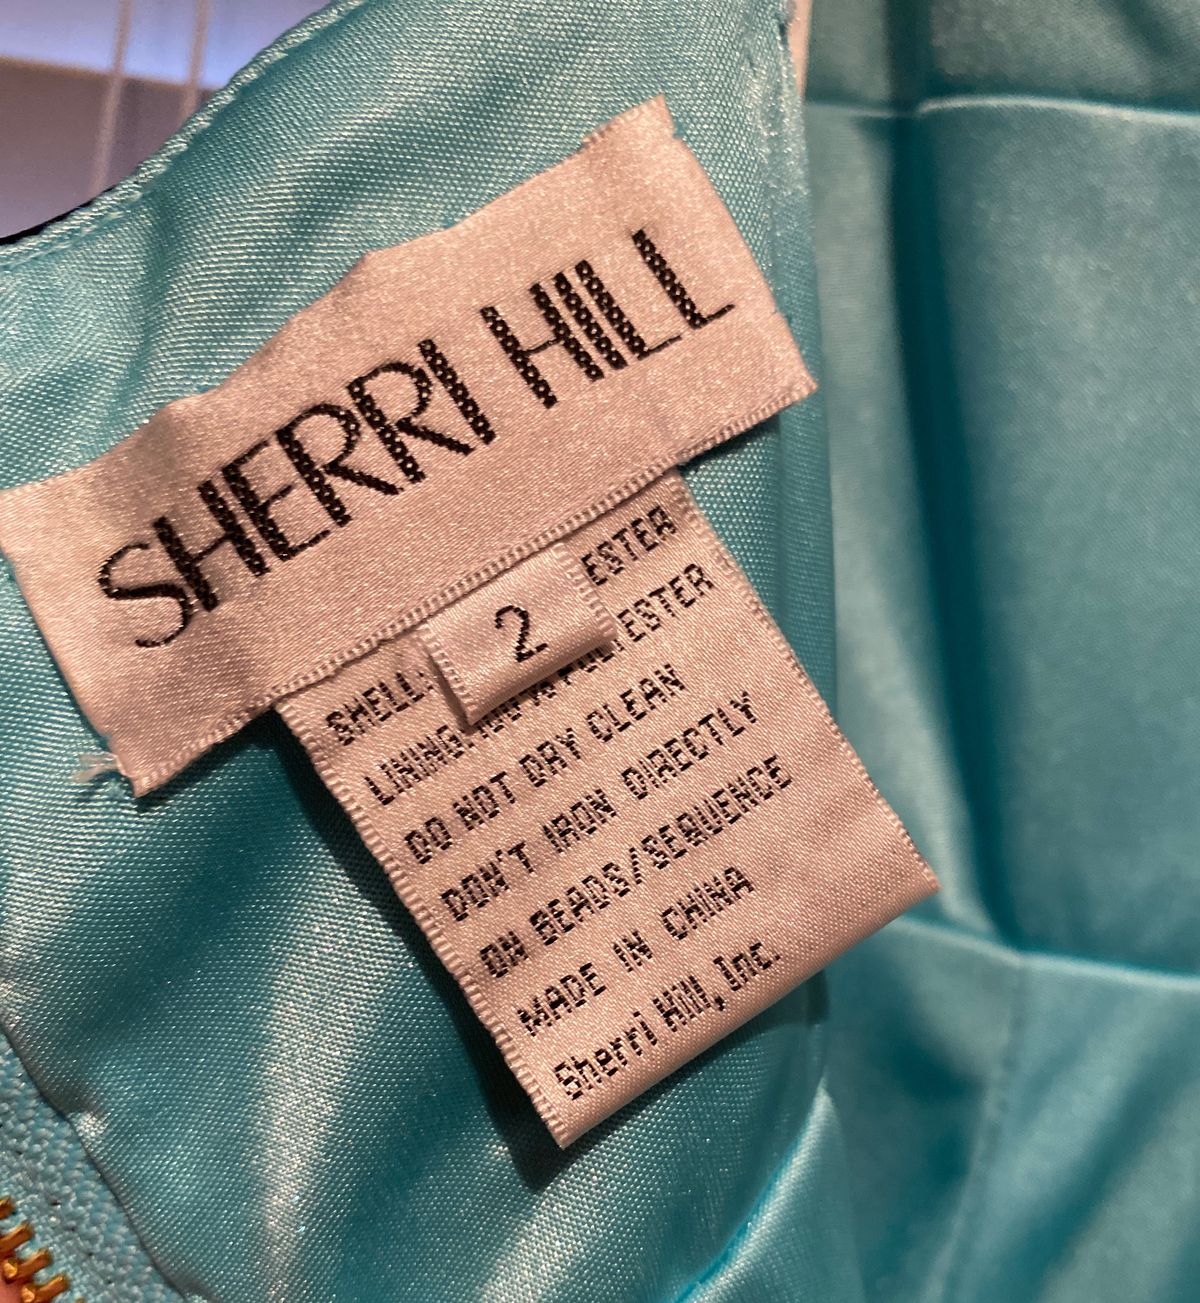 Sherri Hill Size 2 Prom Blue Cocktail Dress on Queenly